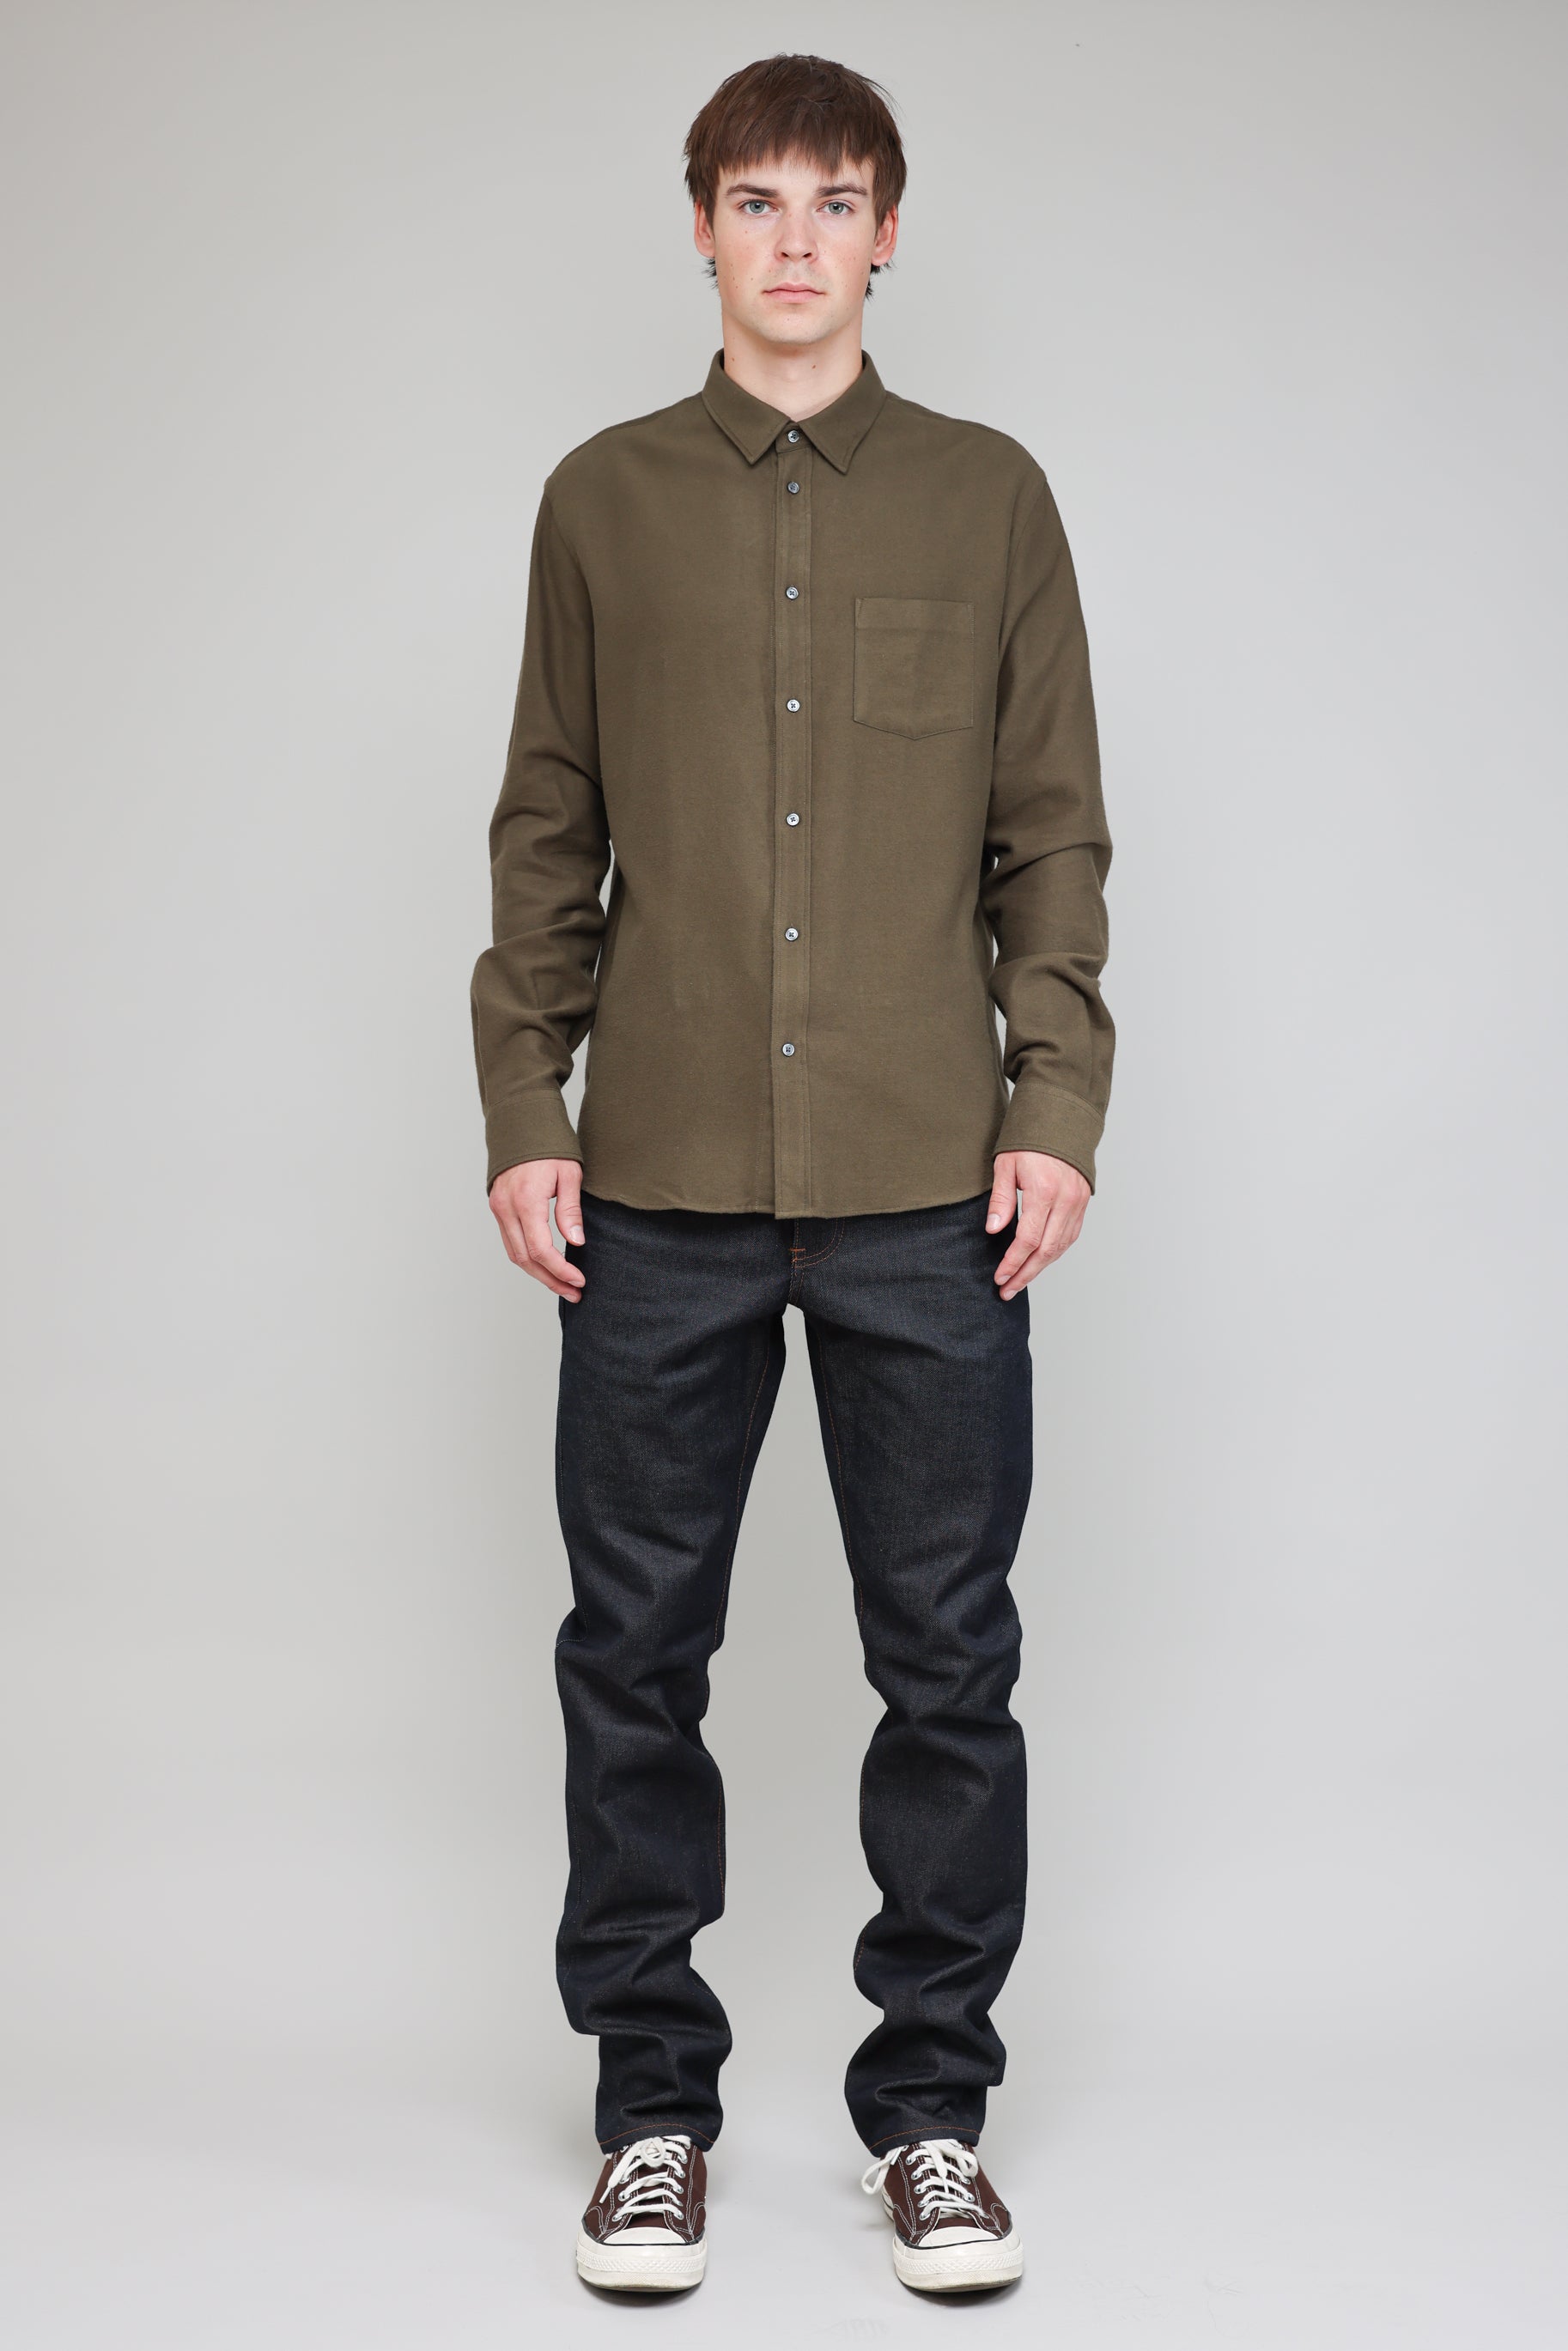 Japanese Flannel in Army Green 05